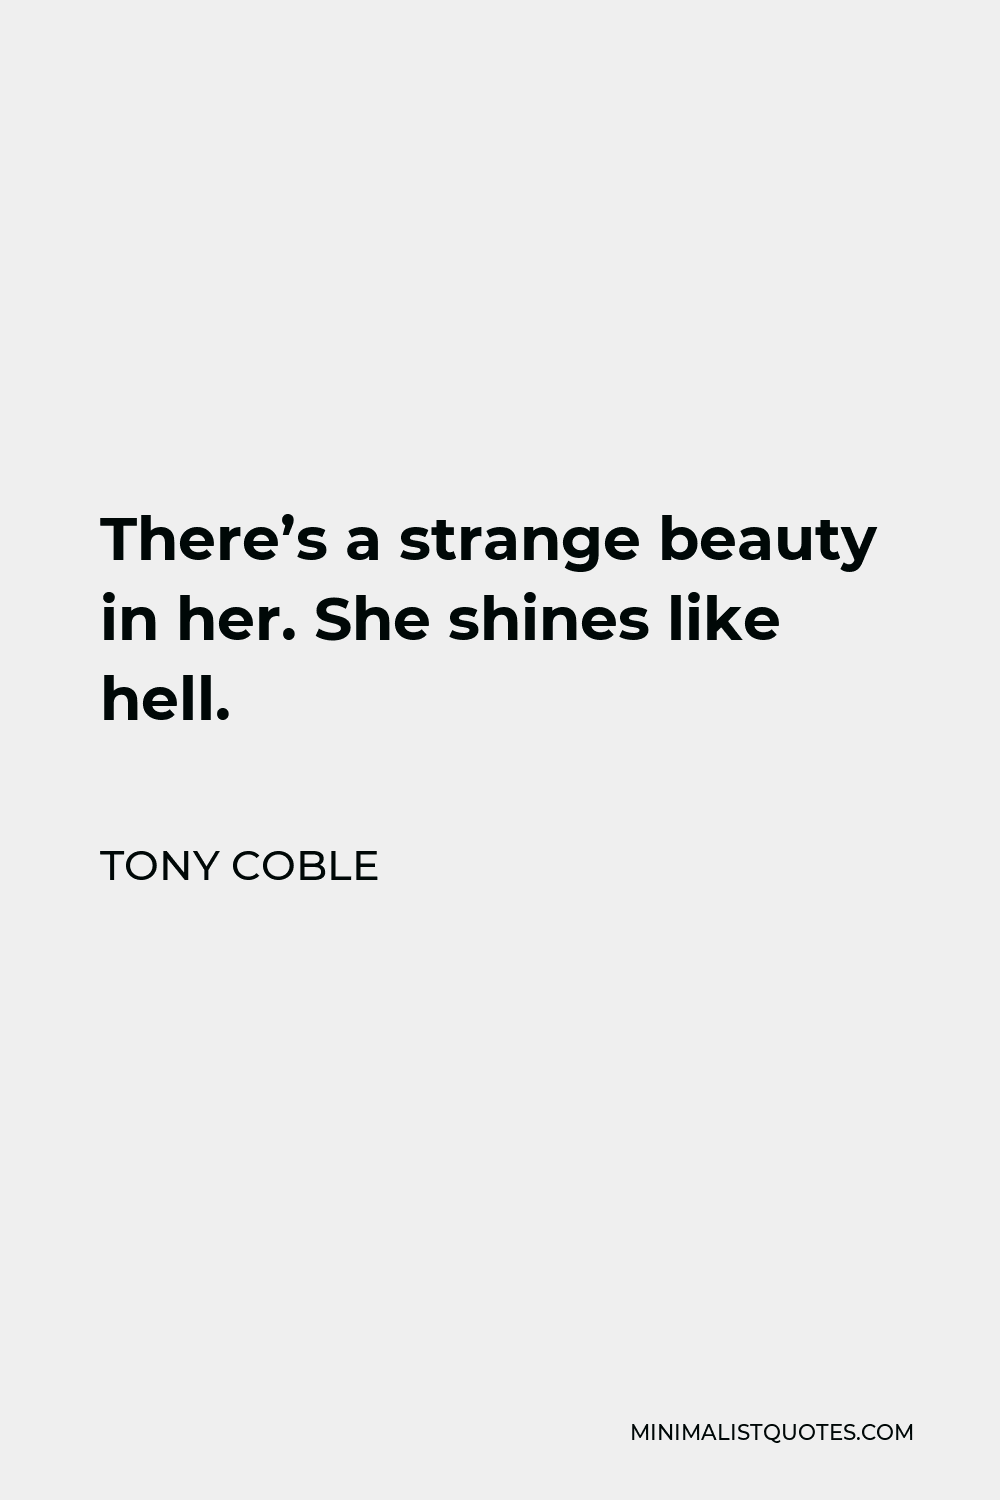 Tony Coble Quote - There’s a strange beauty in her. She shines like hell.